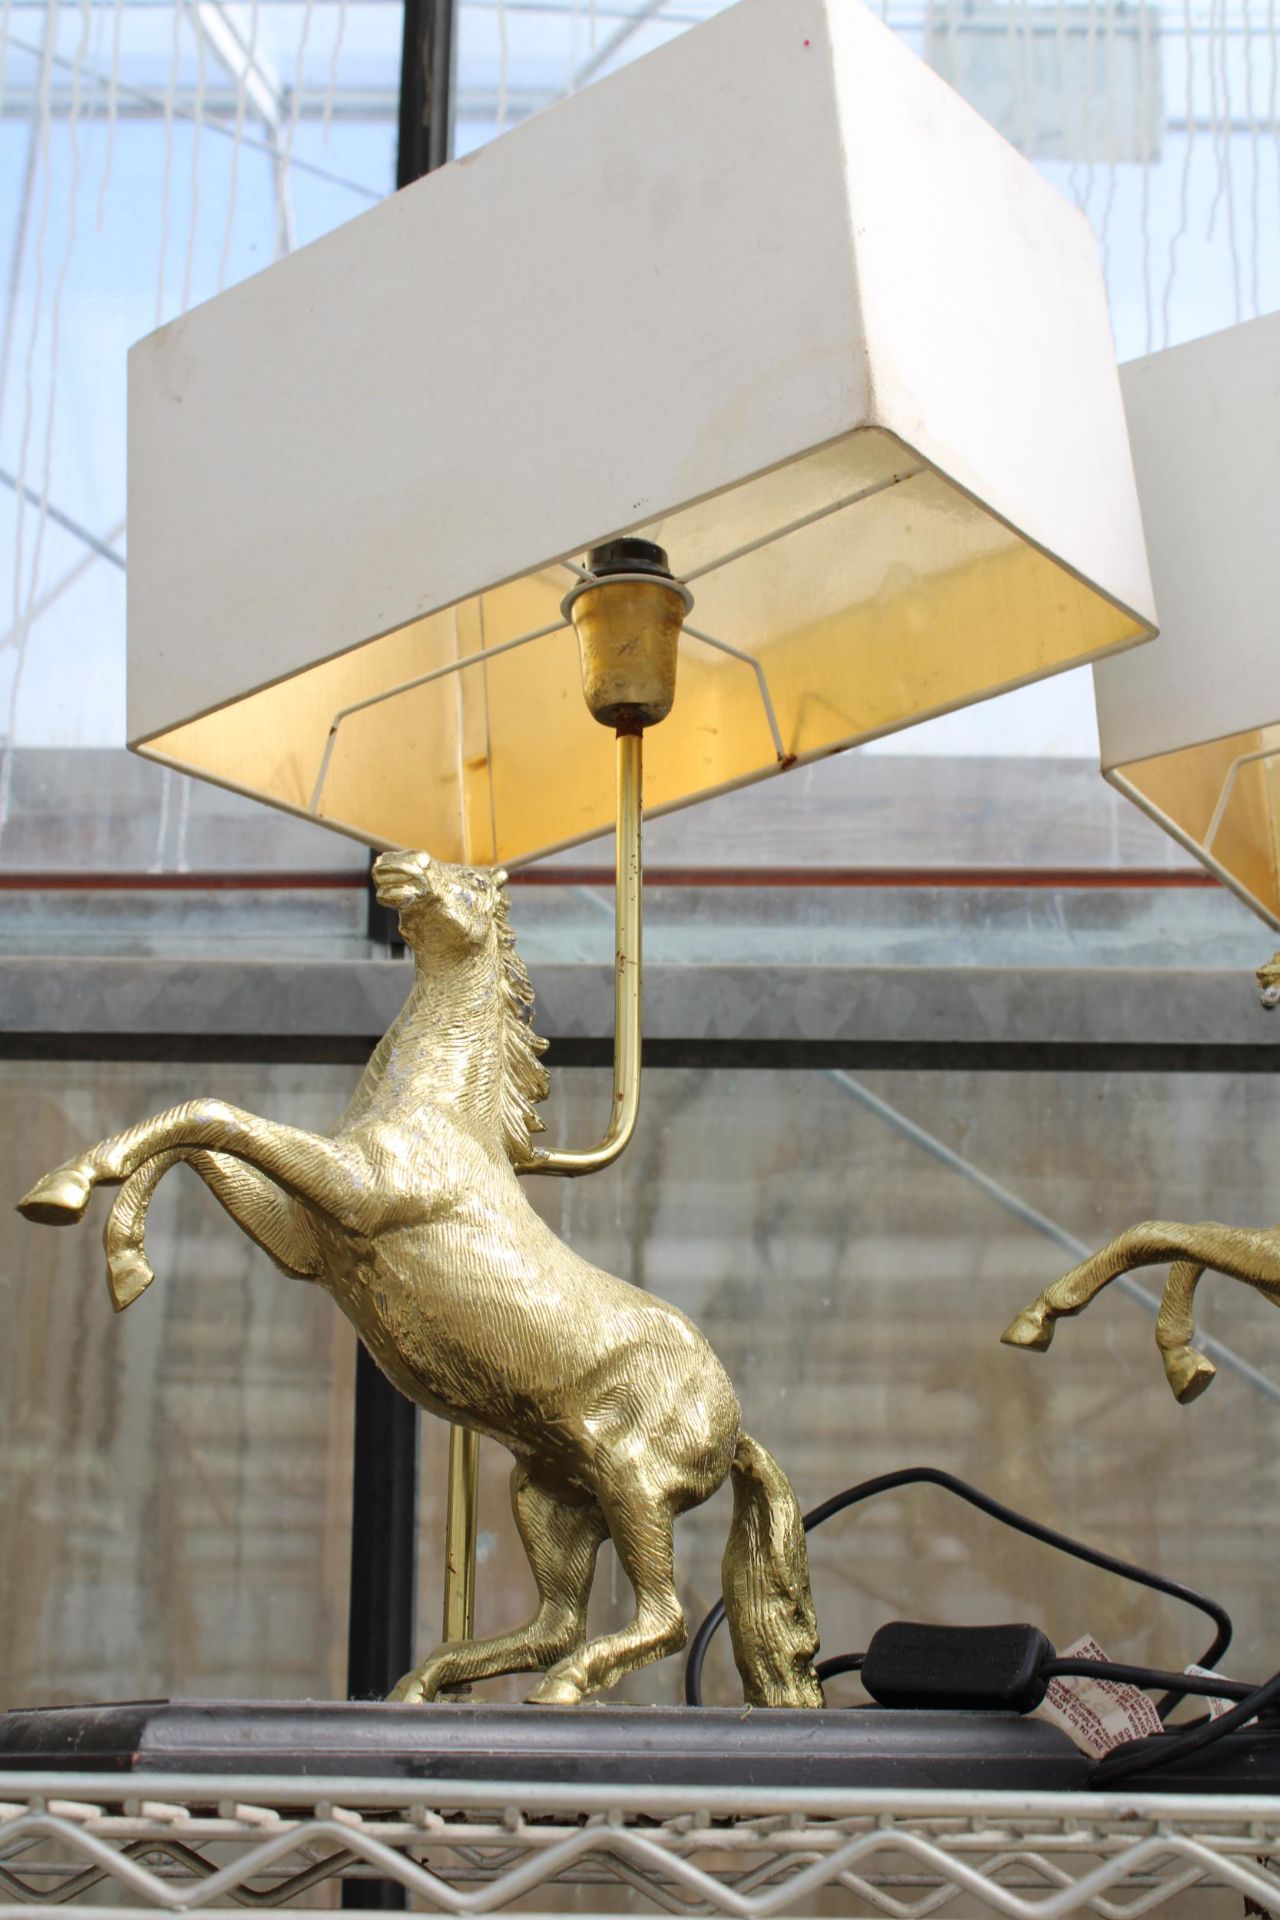 A PAIR OF DECORATIVE TABLE LAMPS WITH BRASS HORSE FIGURE DECORATION - Image 2 of 3